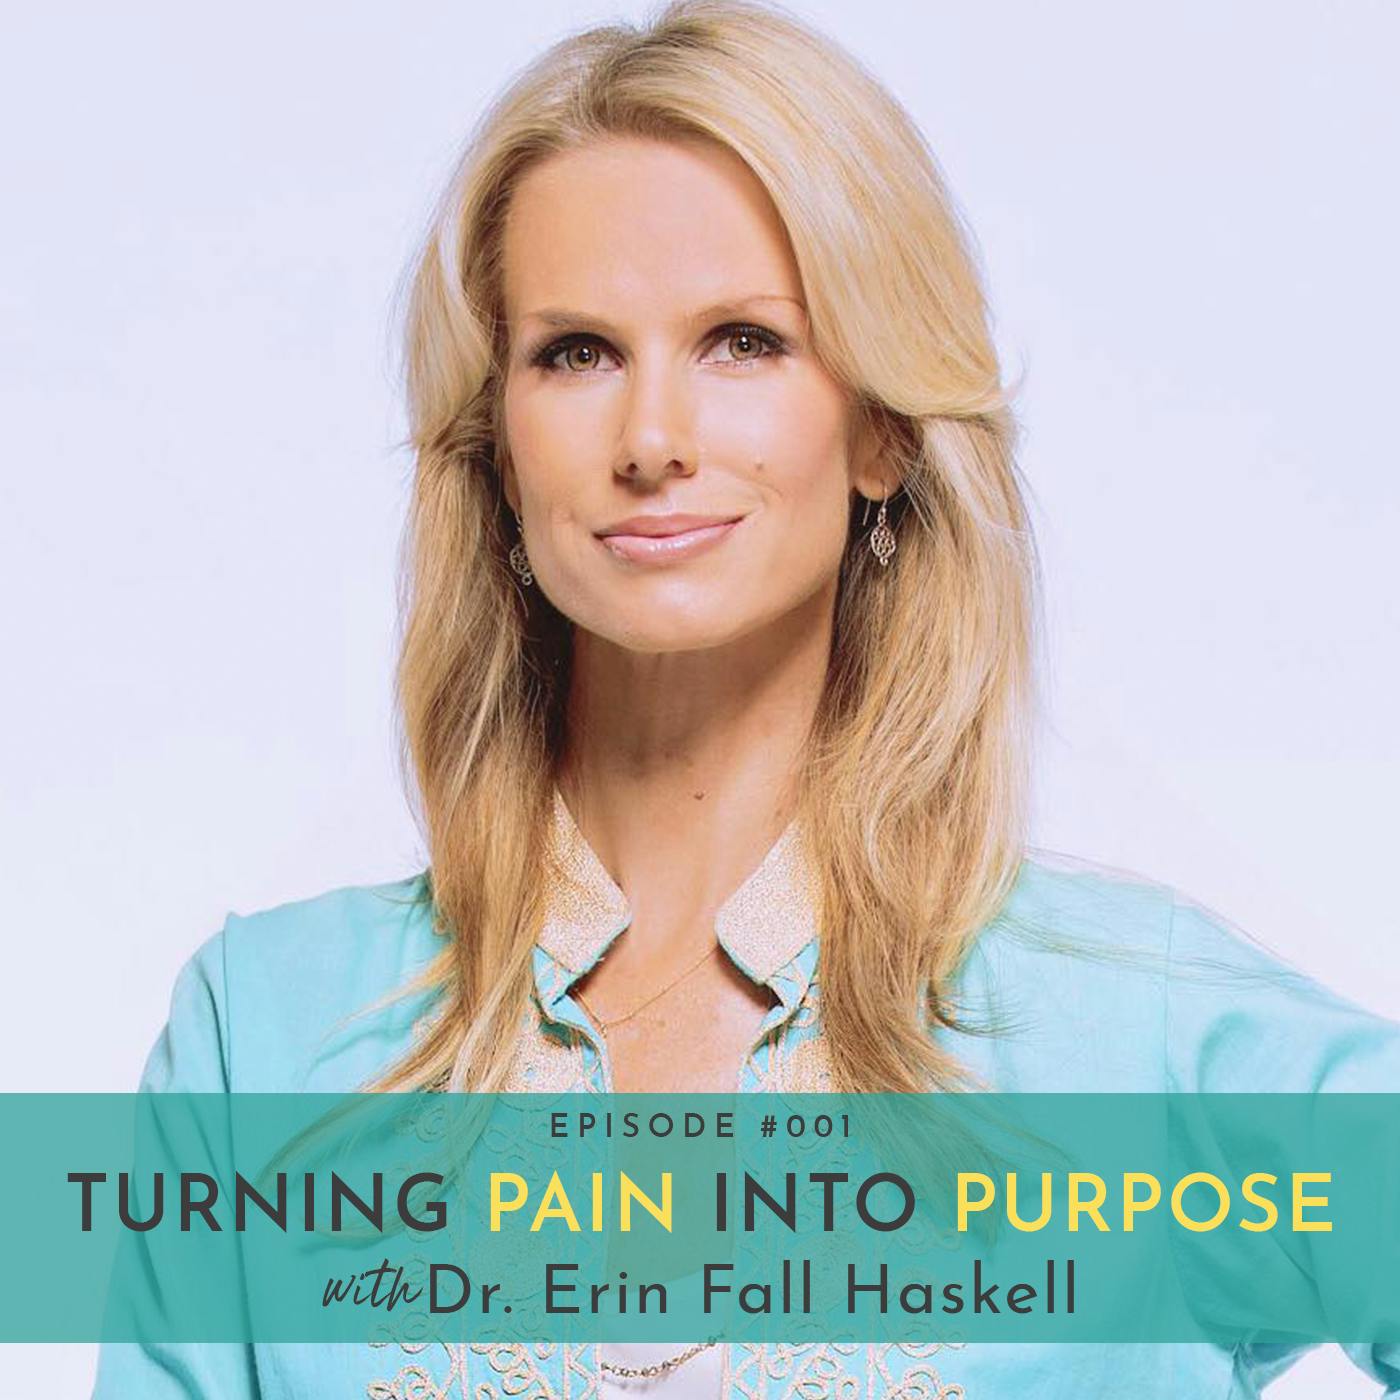 Turning Pain Into Purpose with Dr. Erin Fall Haskell